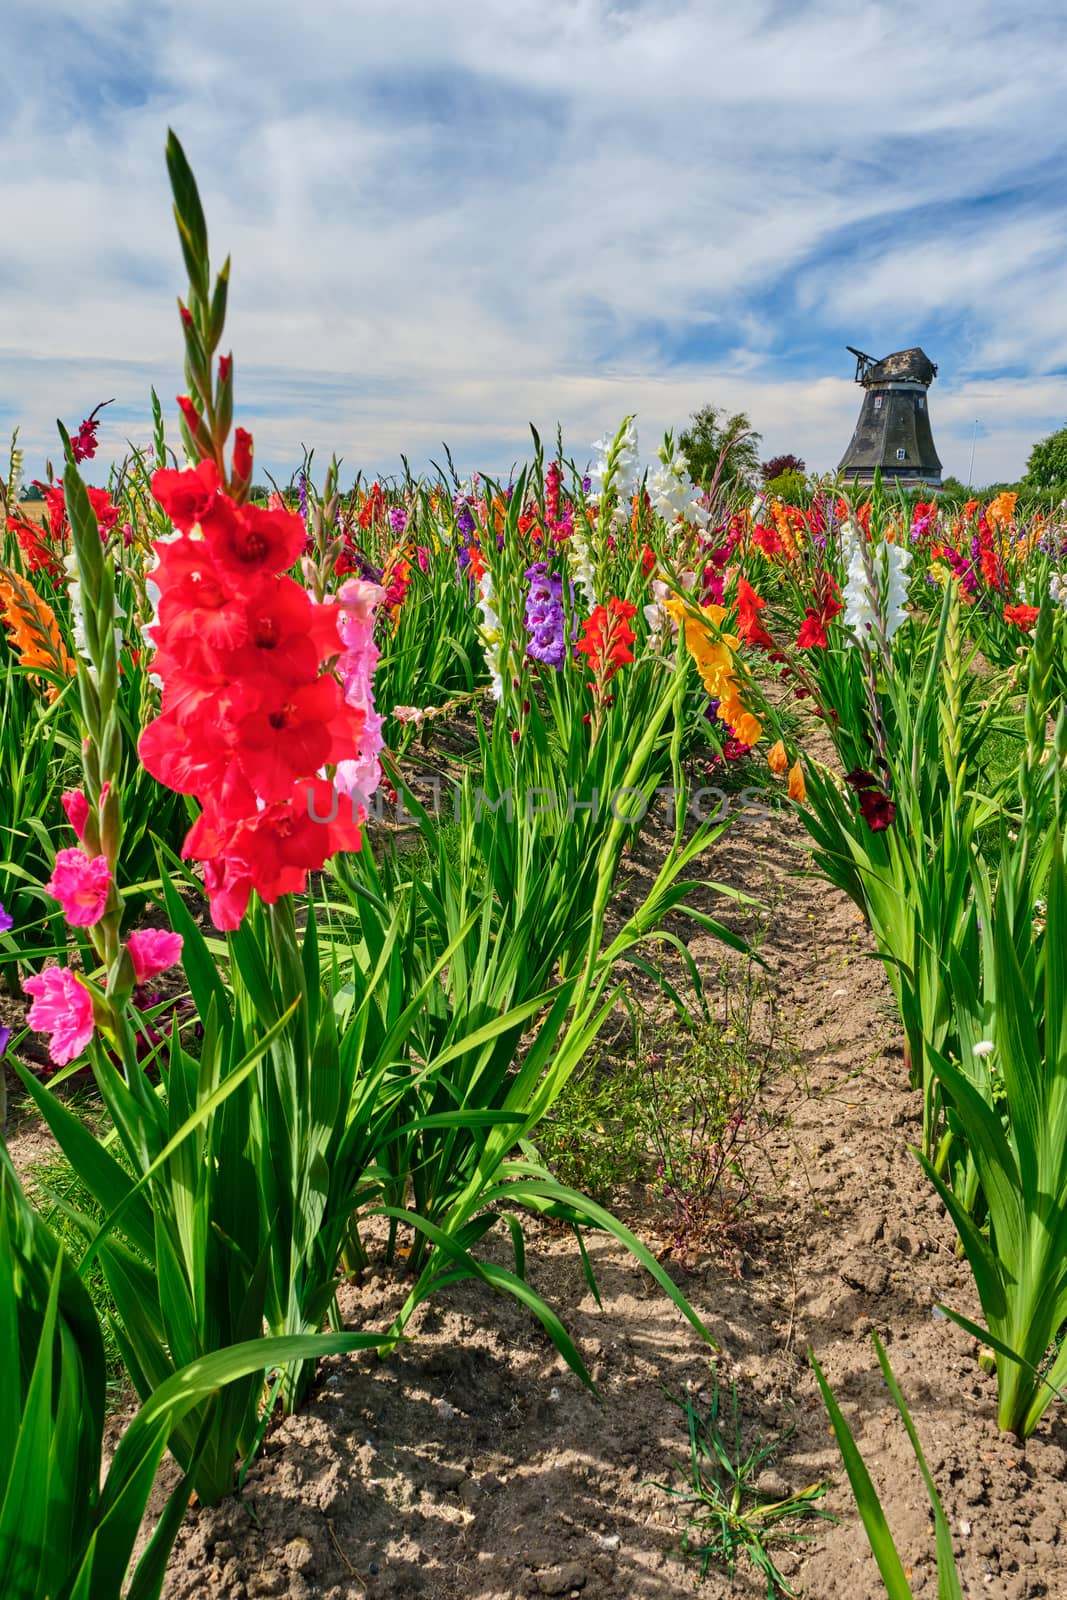 Field of colored gladioli against a cloudy sky by Fischeron